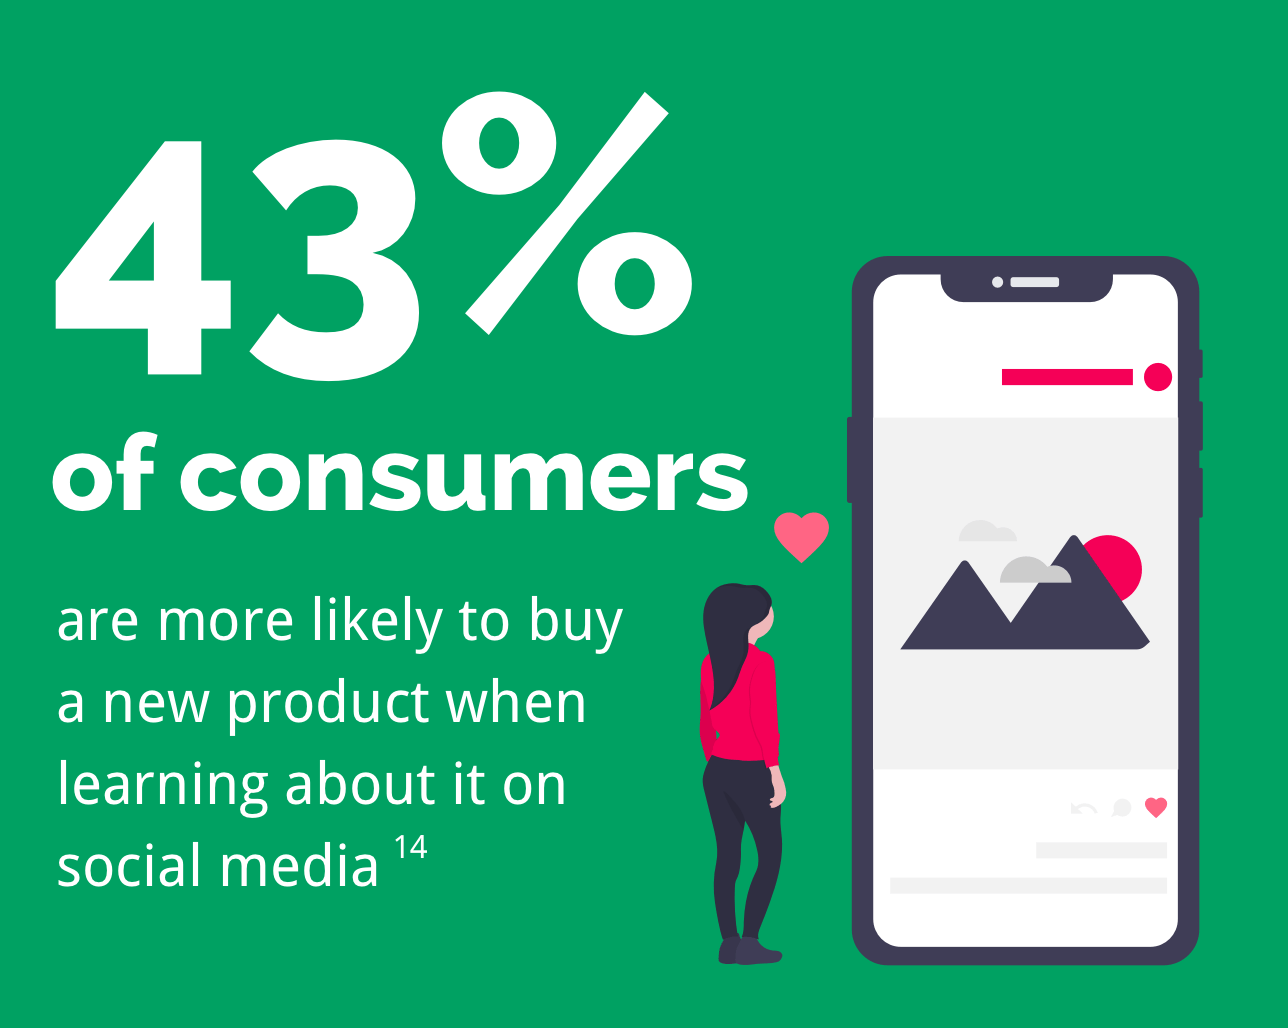 57% of customers who were a member of a loyalty programme, spend more on brands or providers who they are loyal to.